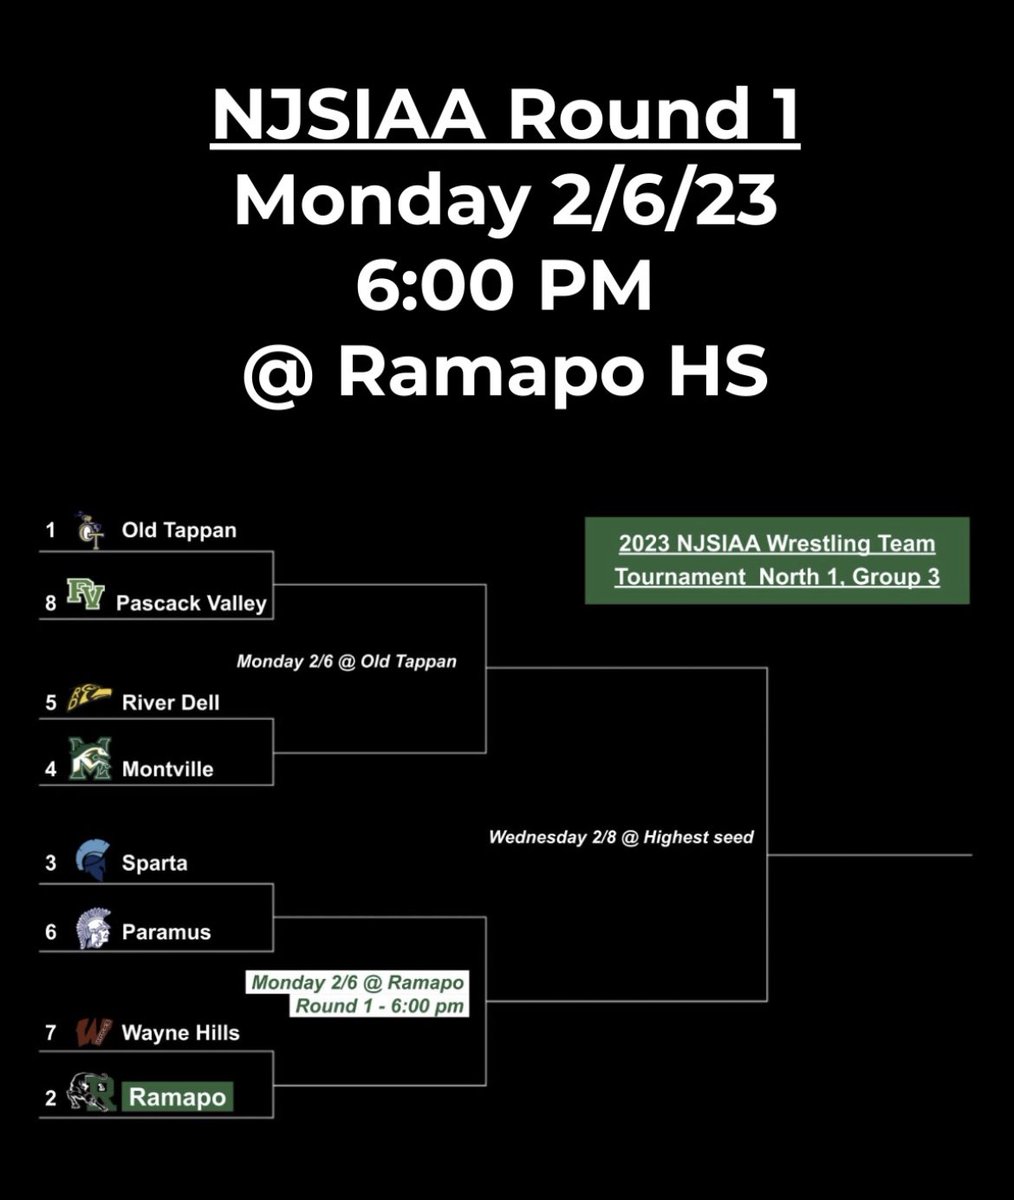 Ramapo will host Rounds 1 & 2 of the Team State tournament tomorrow!! Wrestling starts at 6:00 pm on Monday 2/6/23.  #showup and support the team!!! LETS GO PO!!! #popride @RHSPrincipalNJ @RHSAthleticDir @RIHSuper